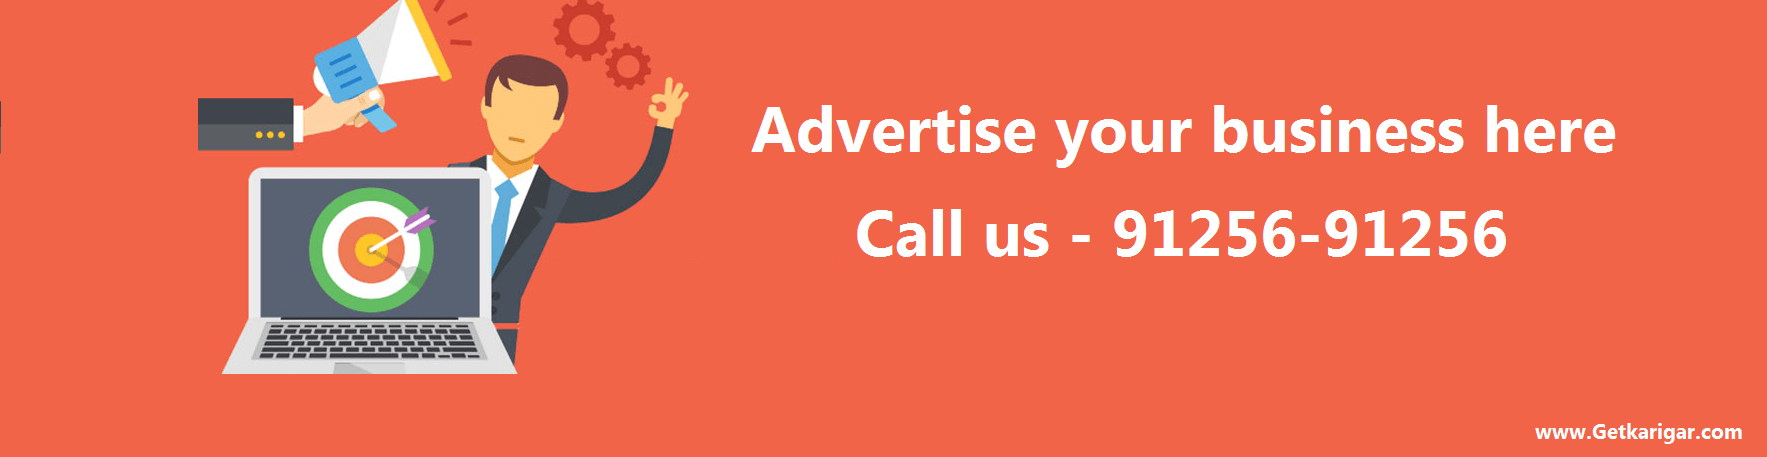 Advertise Your Business Here